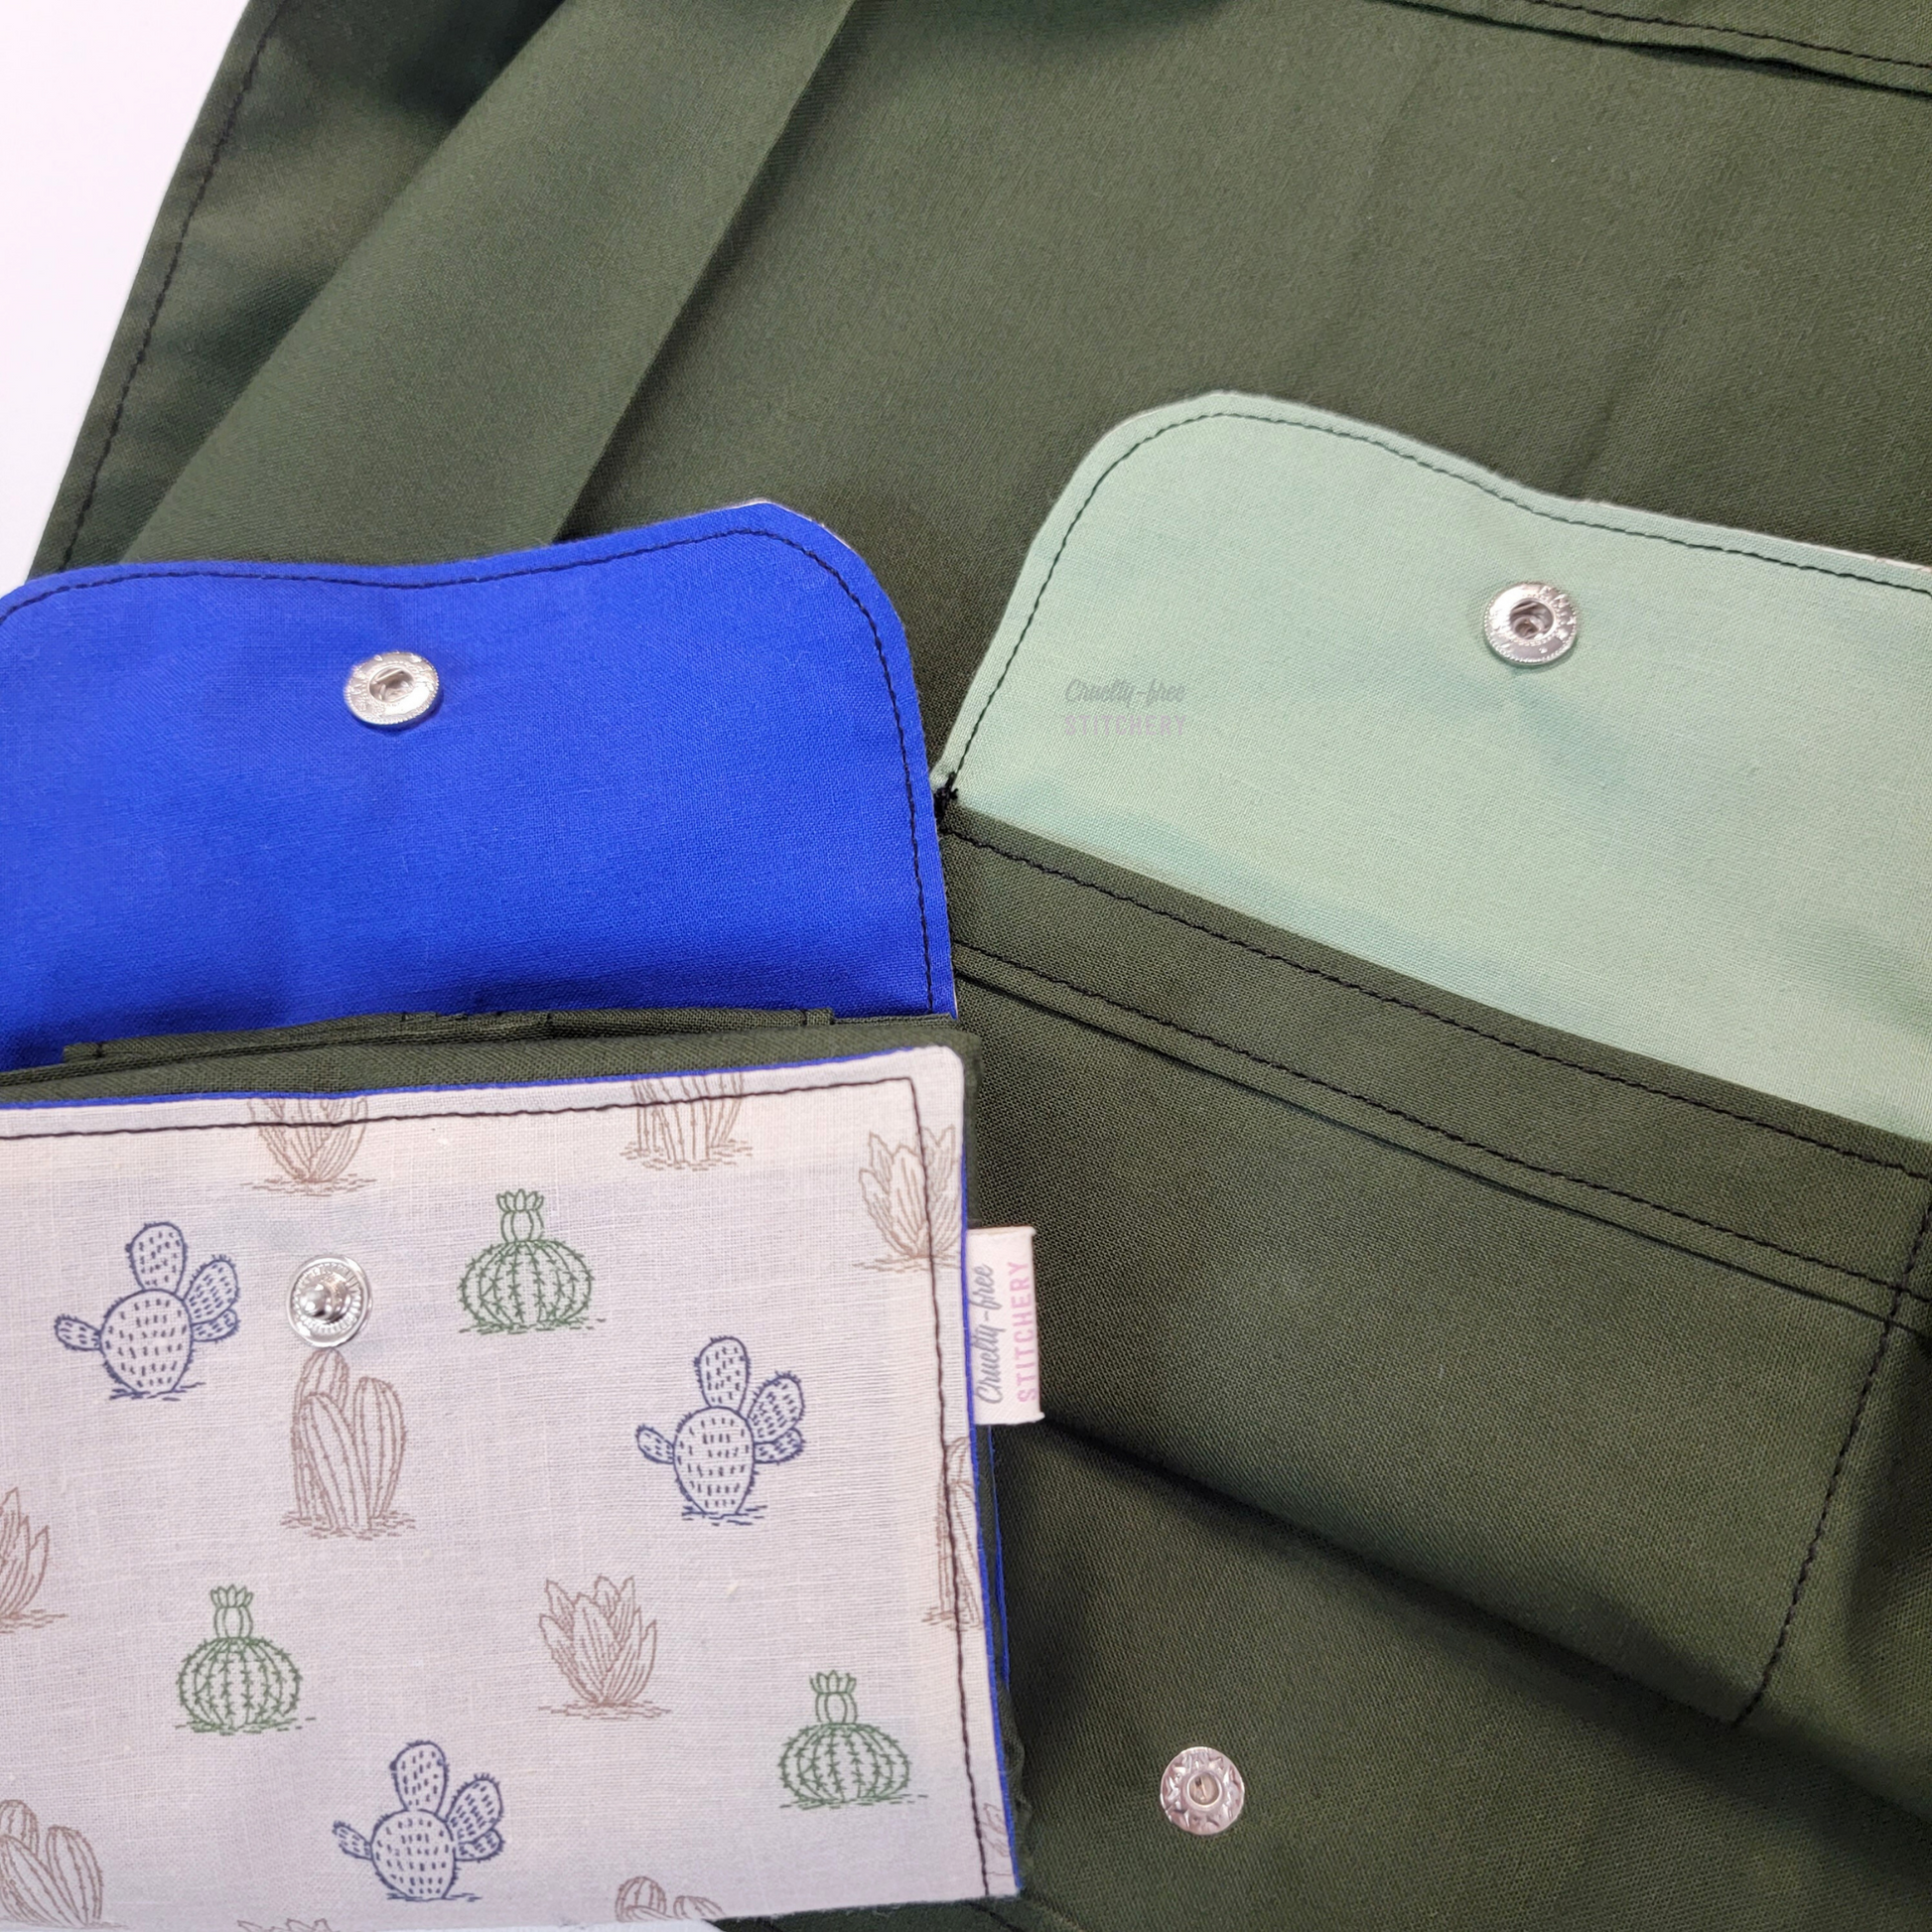 Two inner flaps shown together, one is a bright primary blue, the other is a light sage green - to show that the color inside may vary.